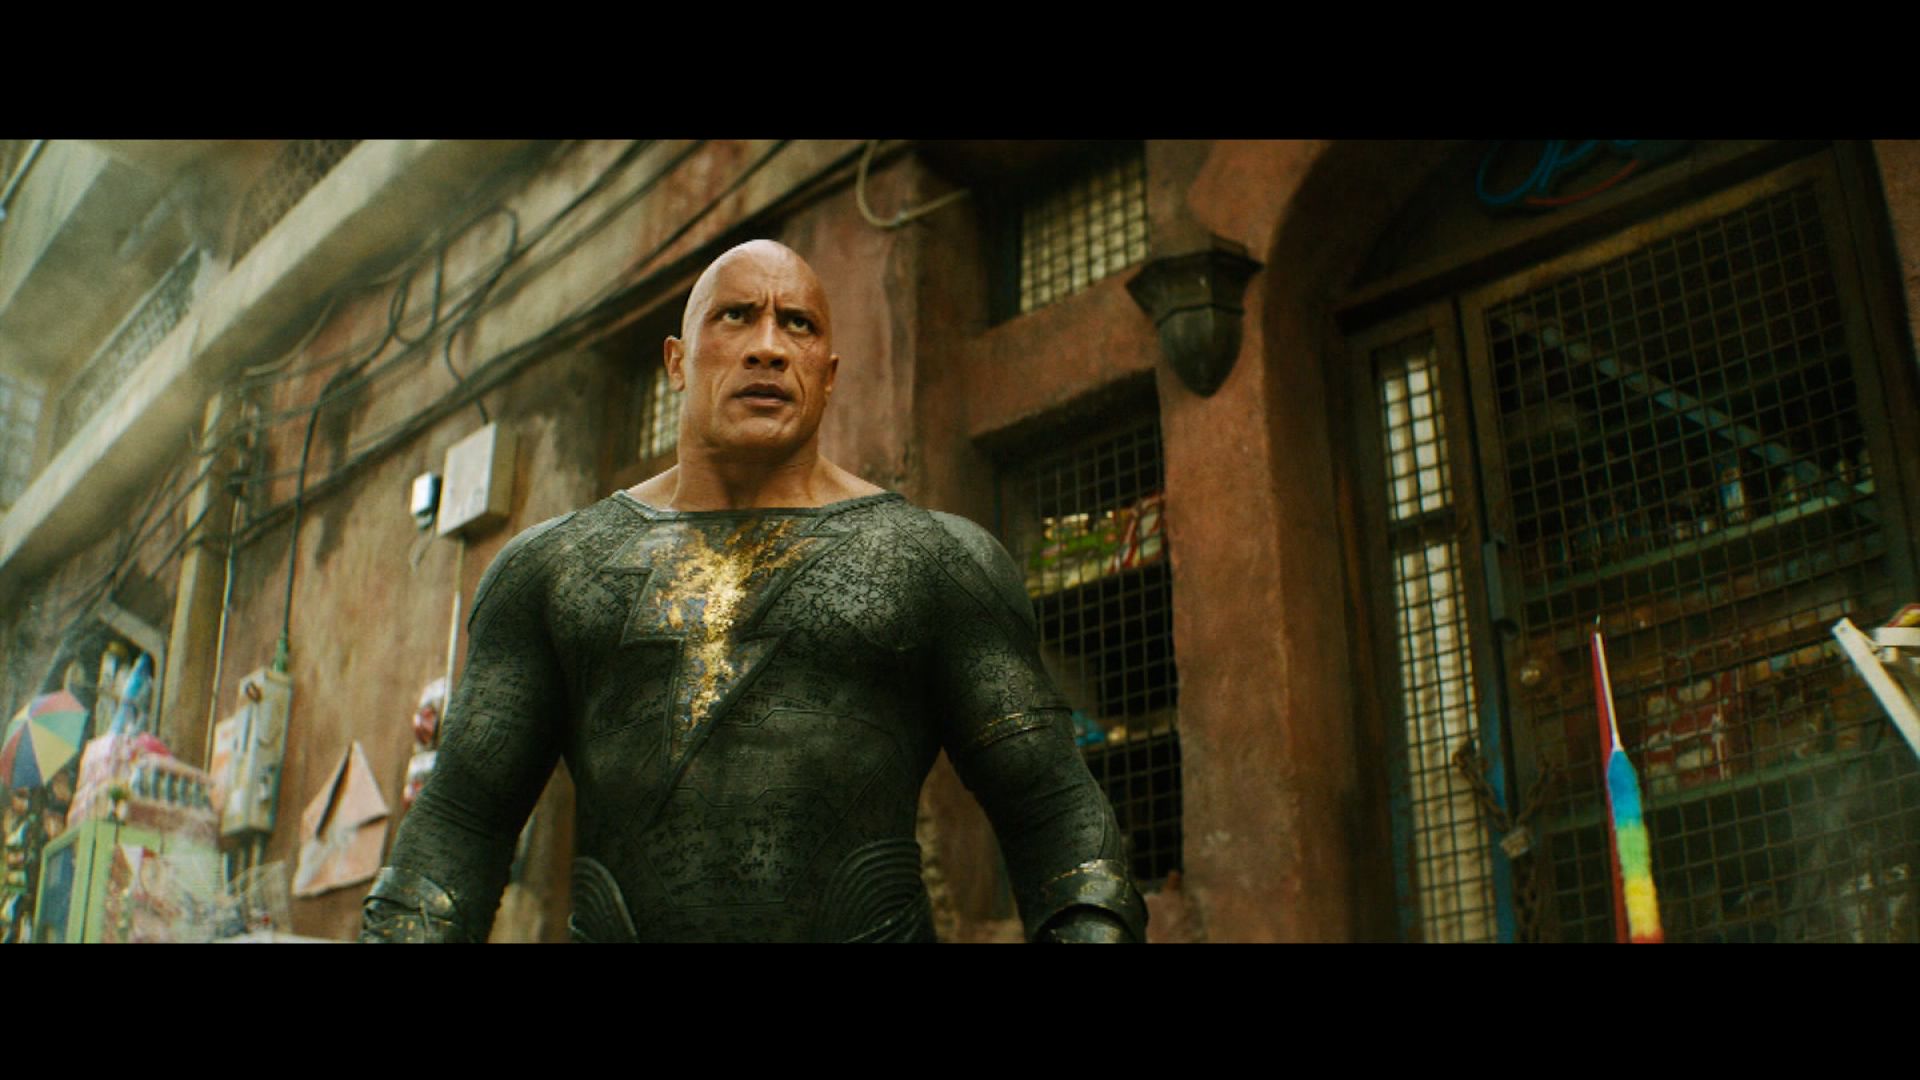 Black Adam box office and audience results destroy critic scores - Xfire